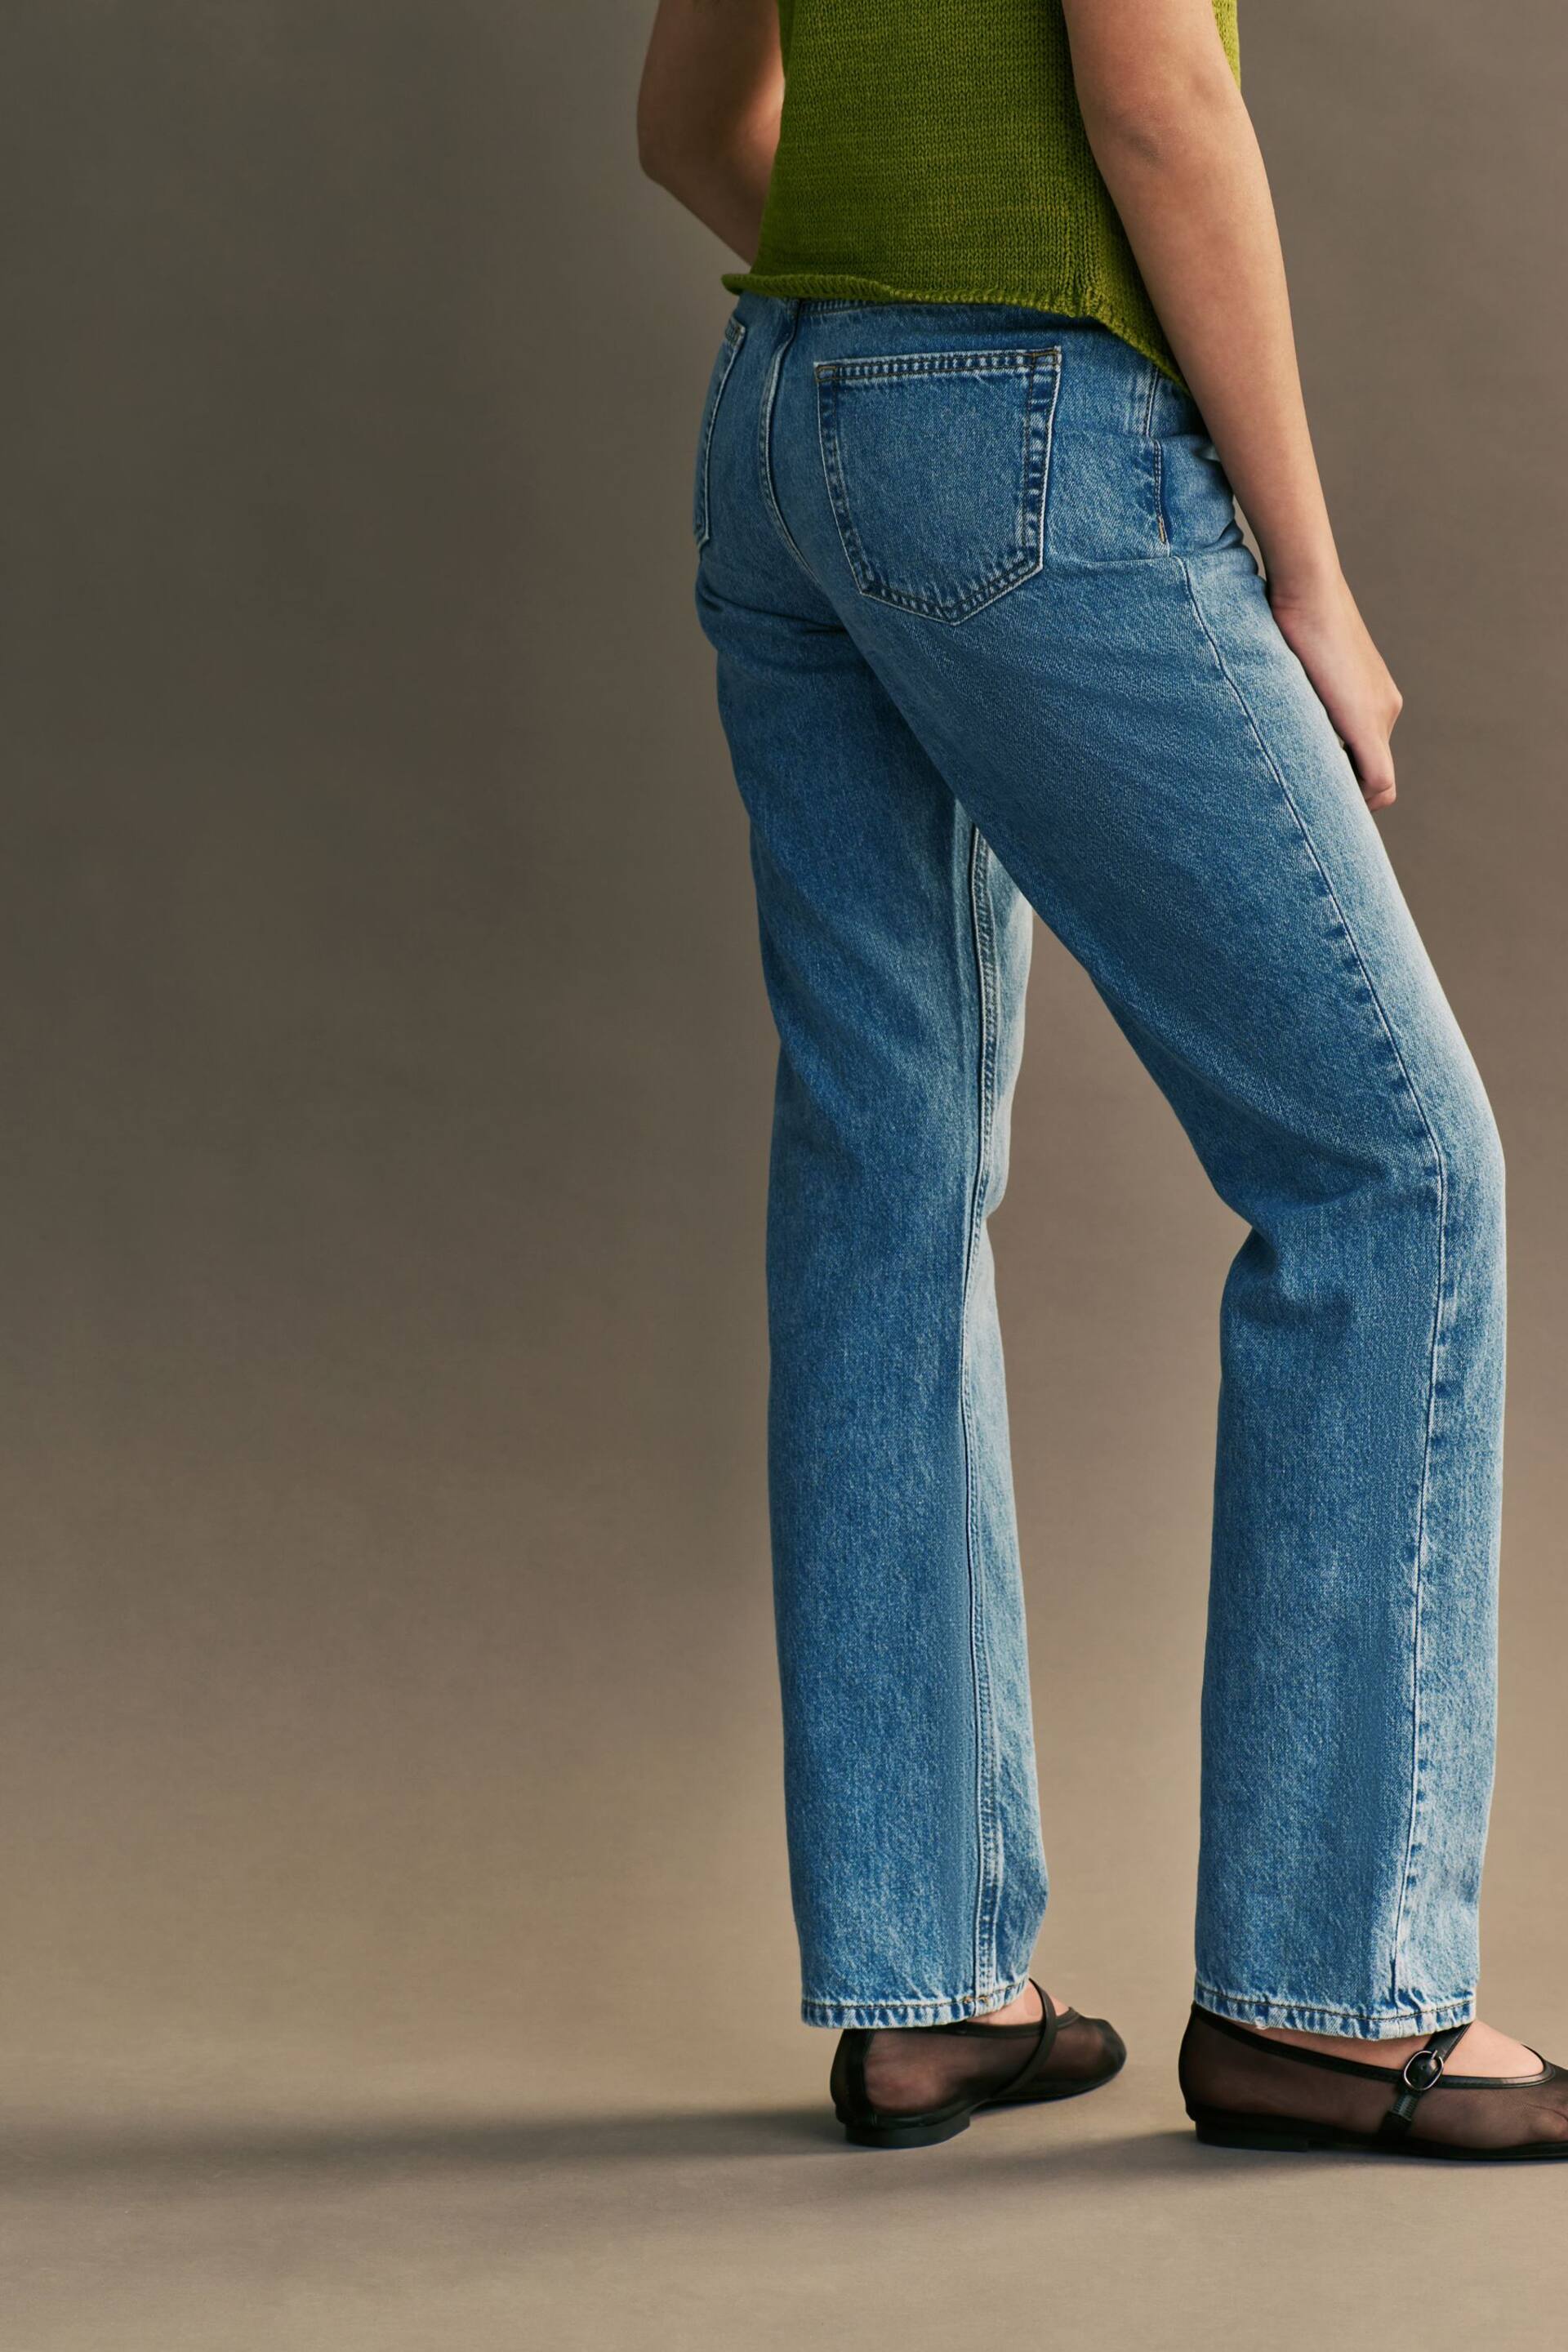 ONLY Blue High Waisted Straight Leg Jeans - Image 2 of 7